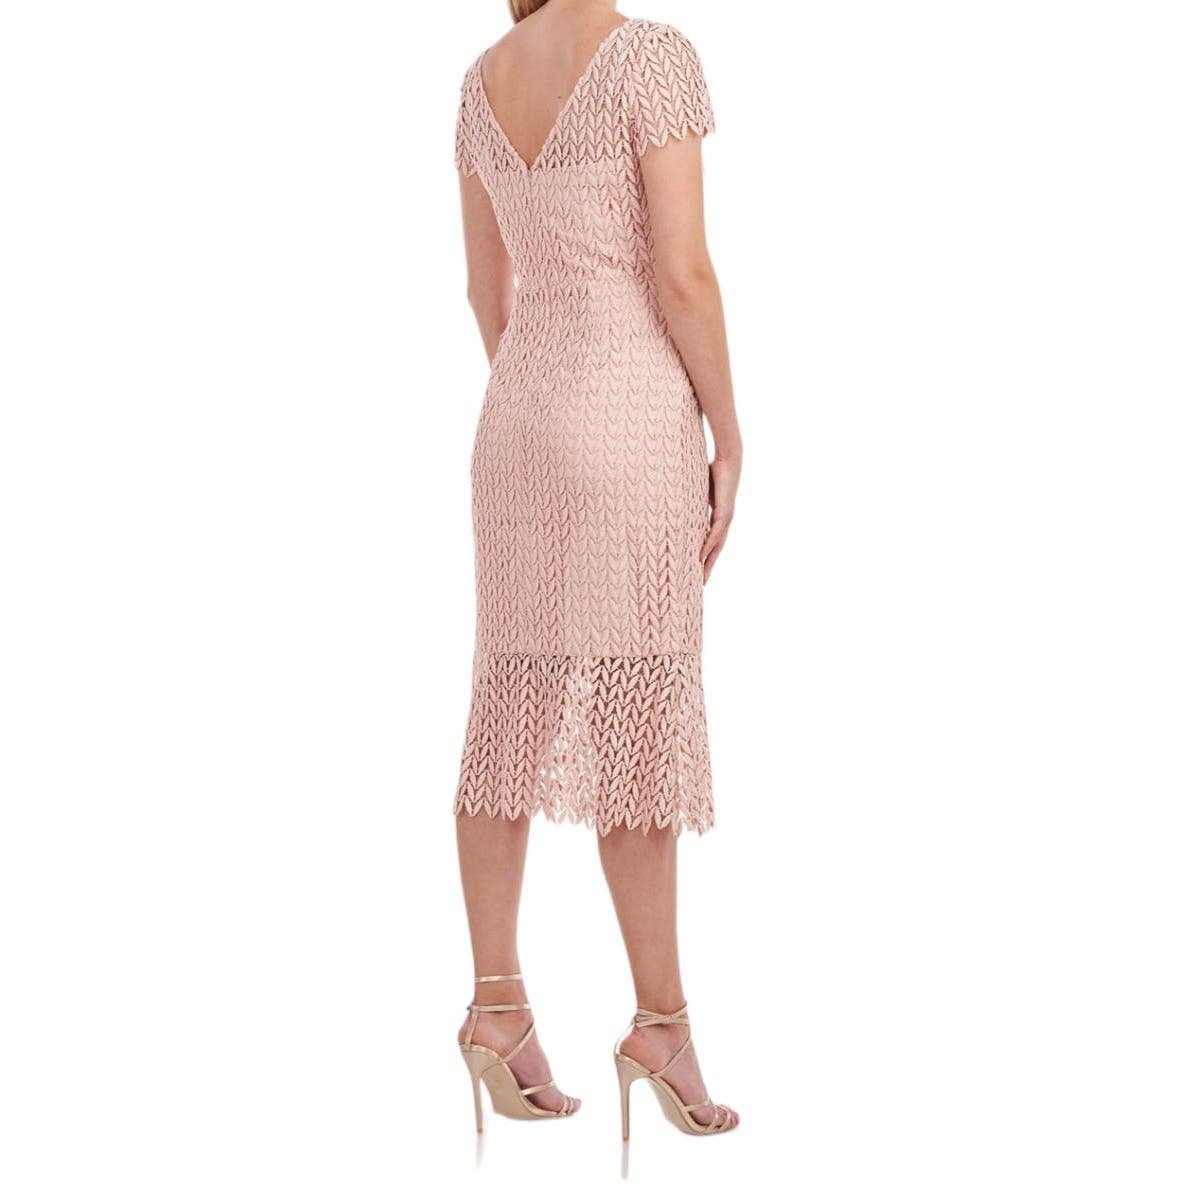 Special offer  Kay Unger Dress Tatum floral lace midi cocktail pink size 6 FjPkQ4kAw Everyday Low Prices